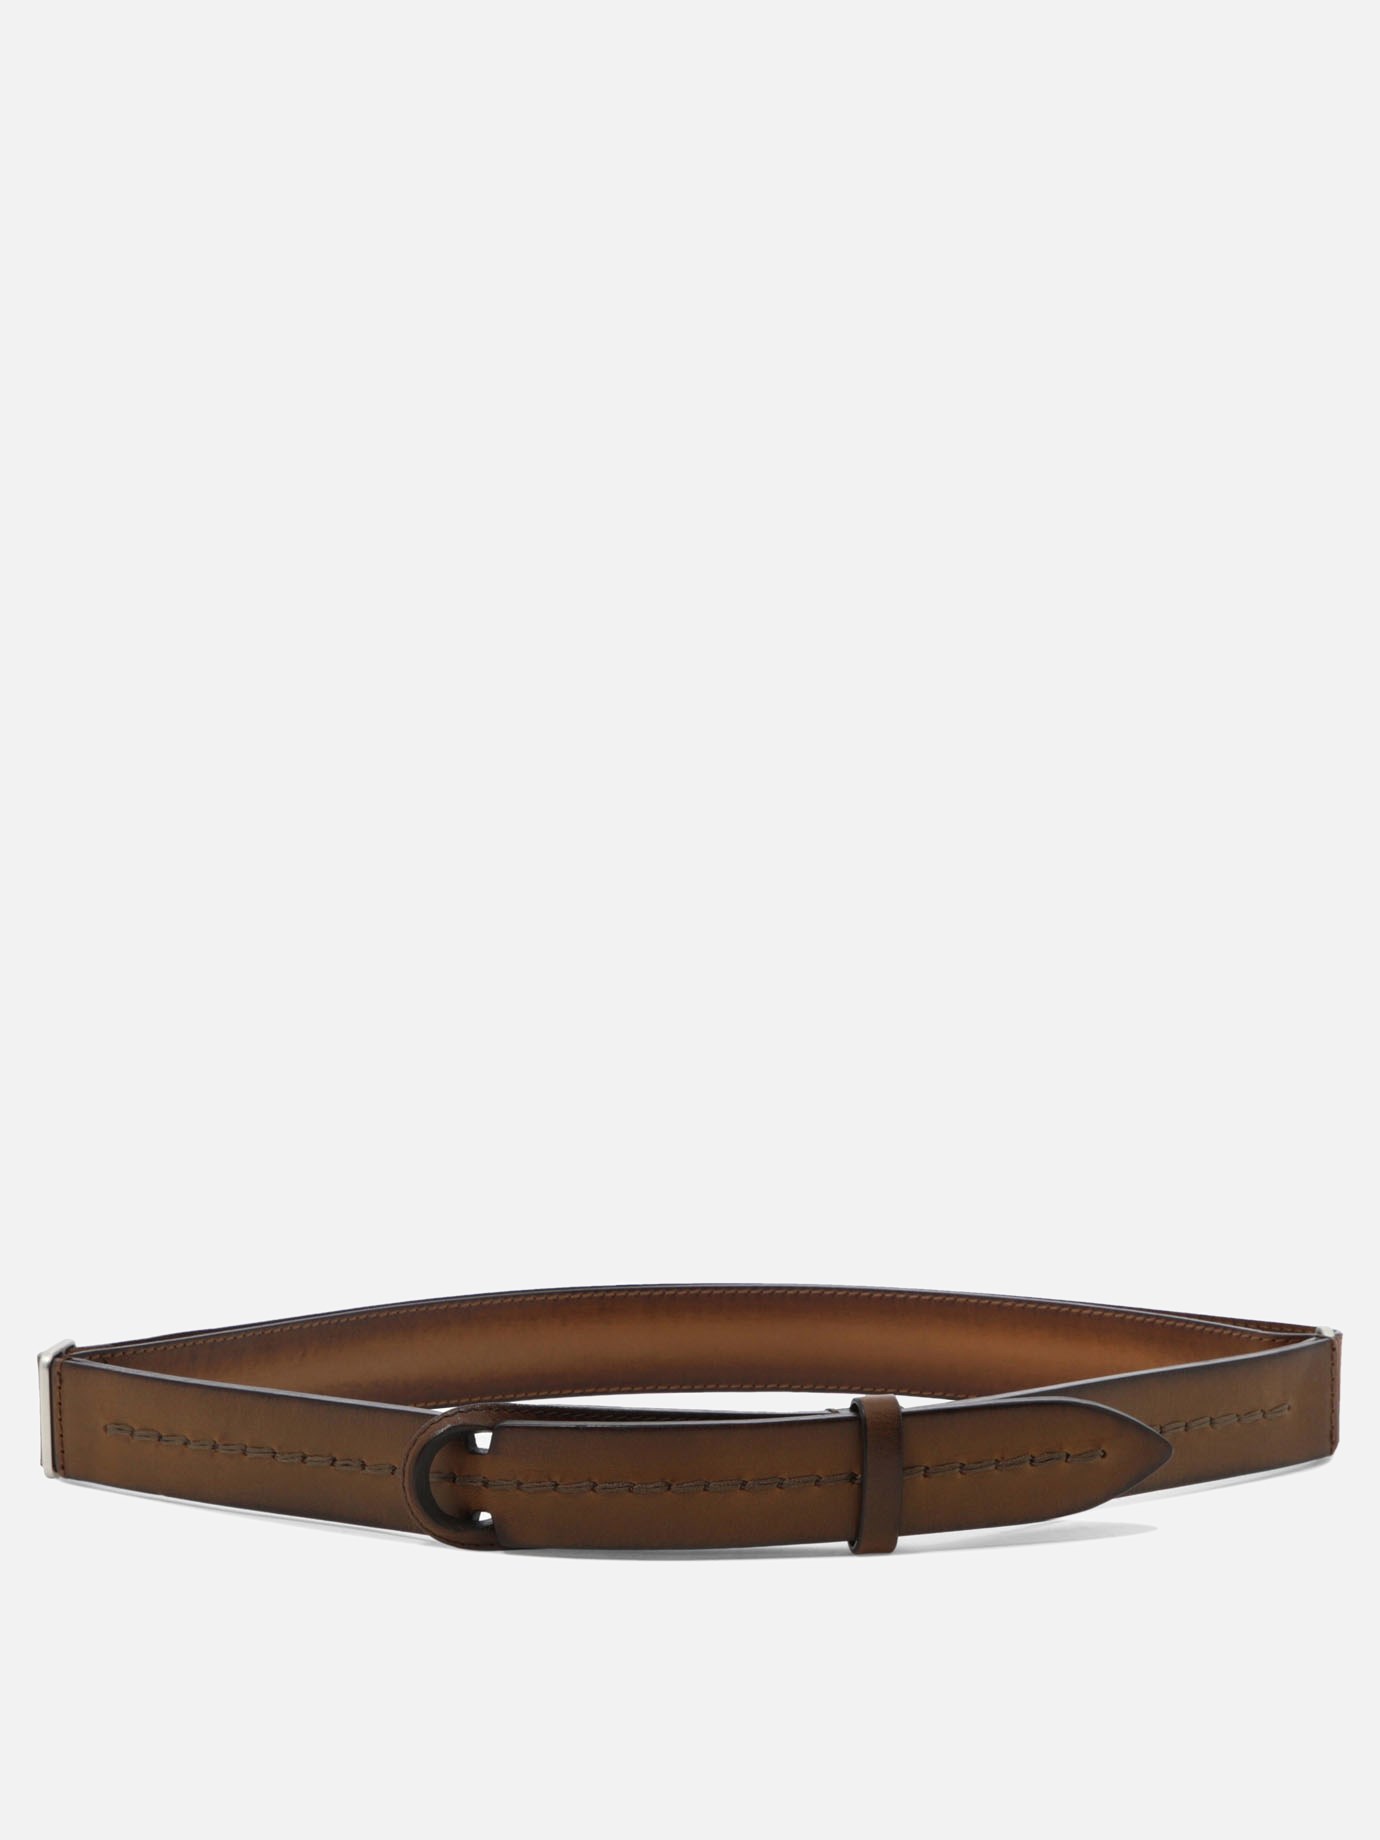  NoBuckle  beltby Orciani - 5